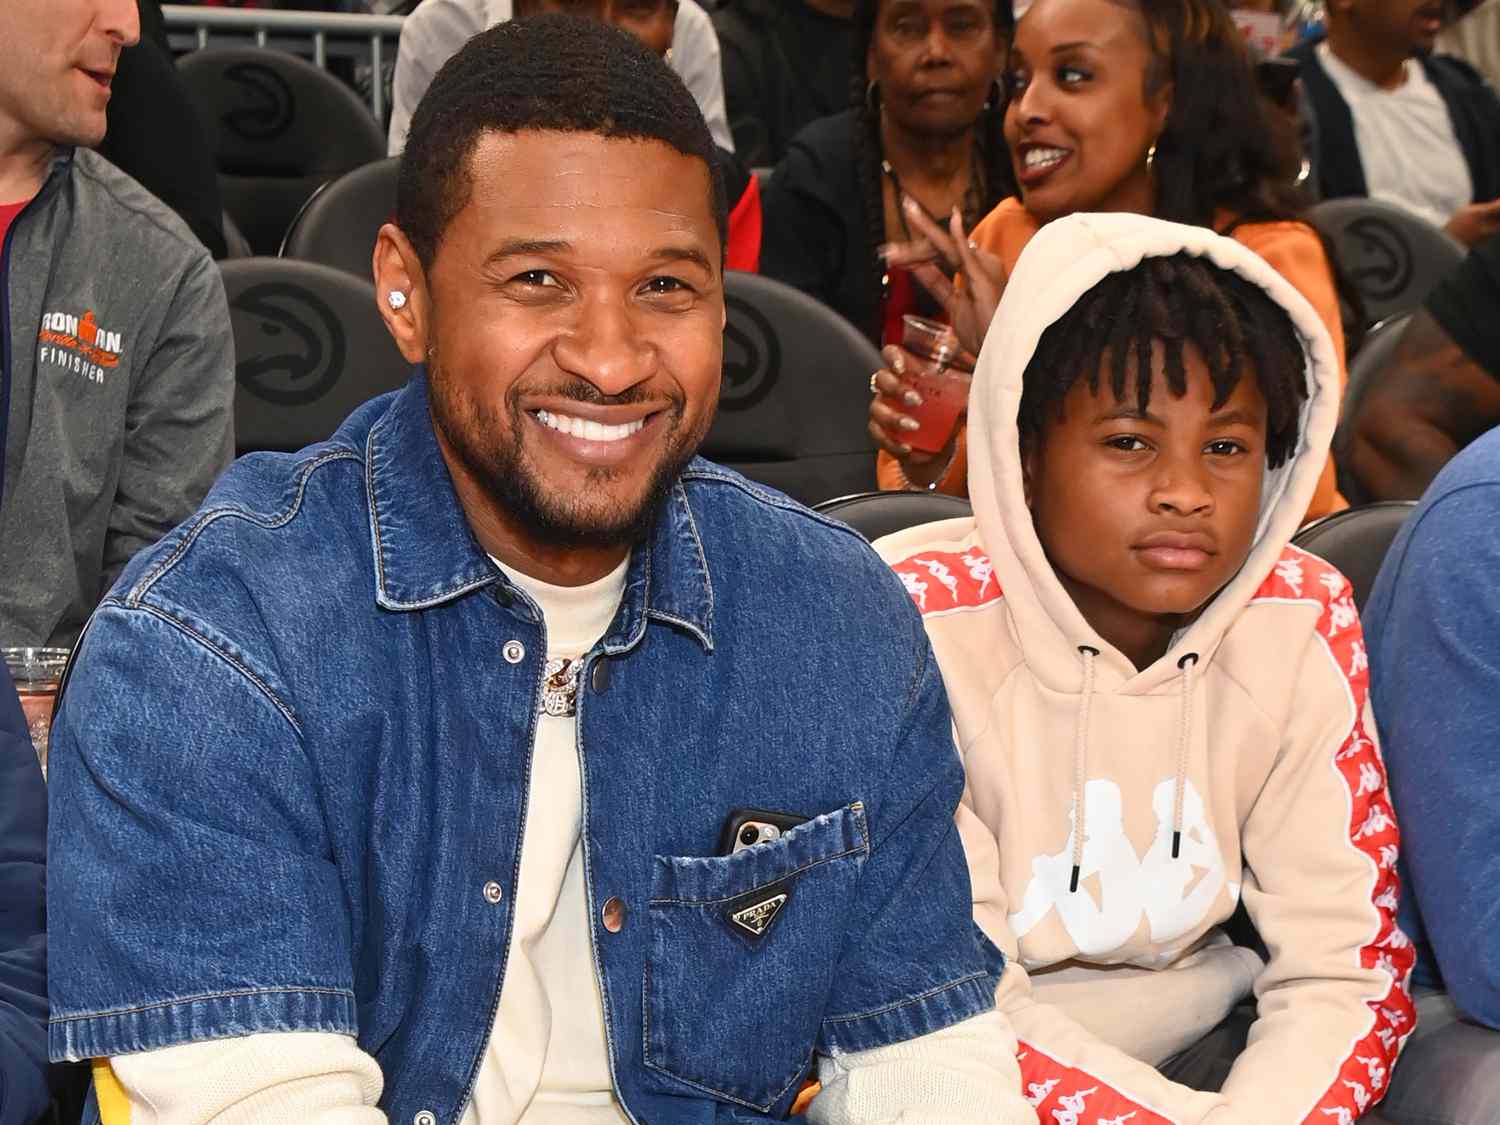 Usher Raymond and his son Usher Raymond V attend the game between Brooklyn Nets and the Atlanta Hawks at State Farm Arena on April 02, 2022 in Atlanta, Georgia